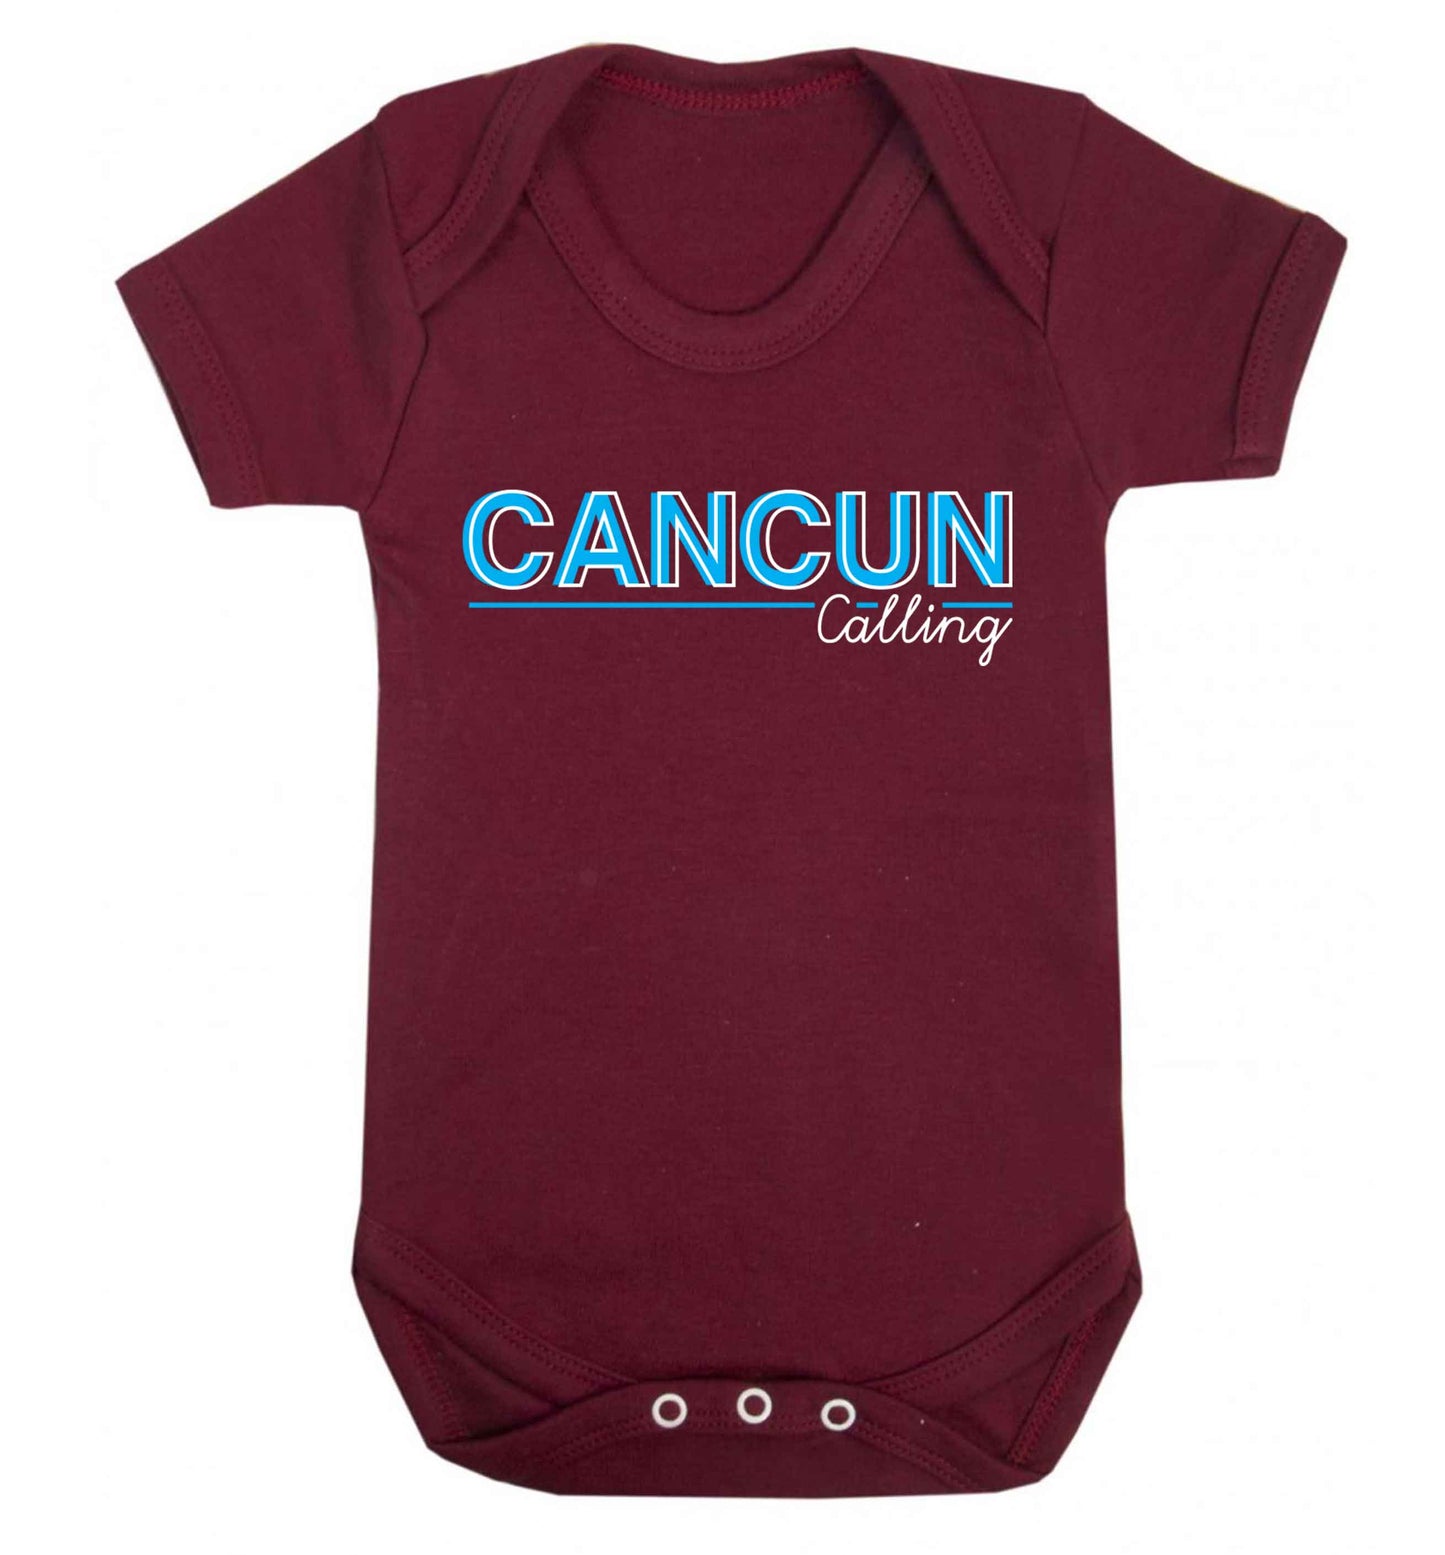 Cancun calling Baby Vest maroon 18-24 months